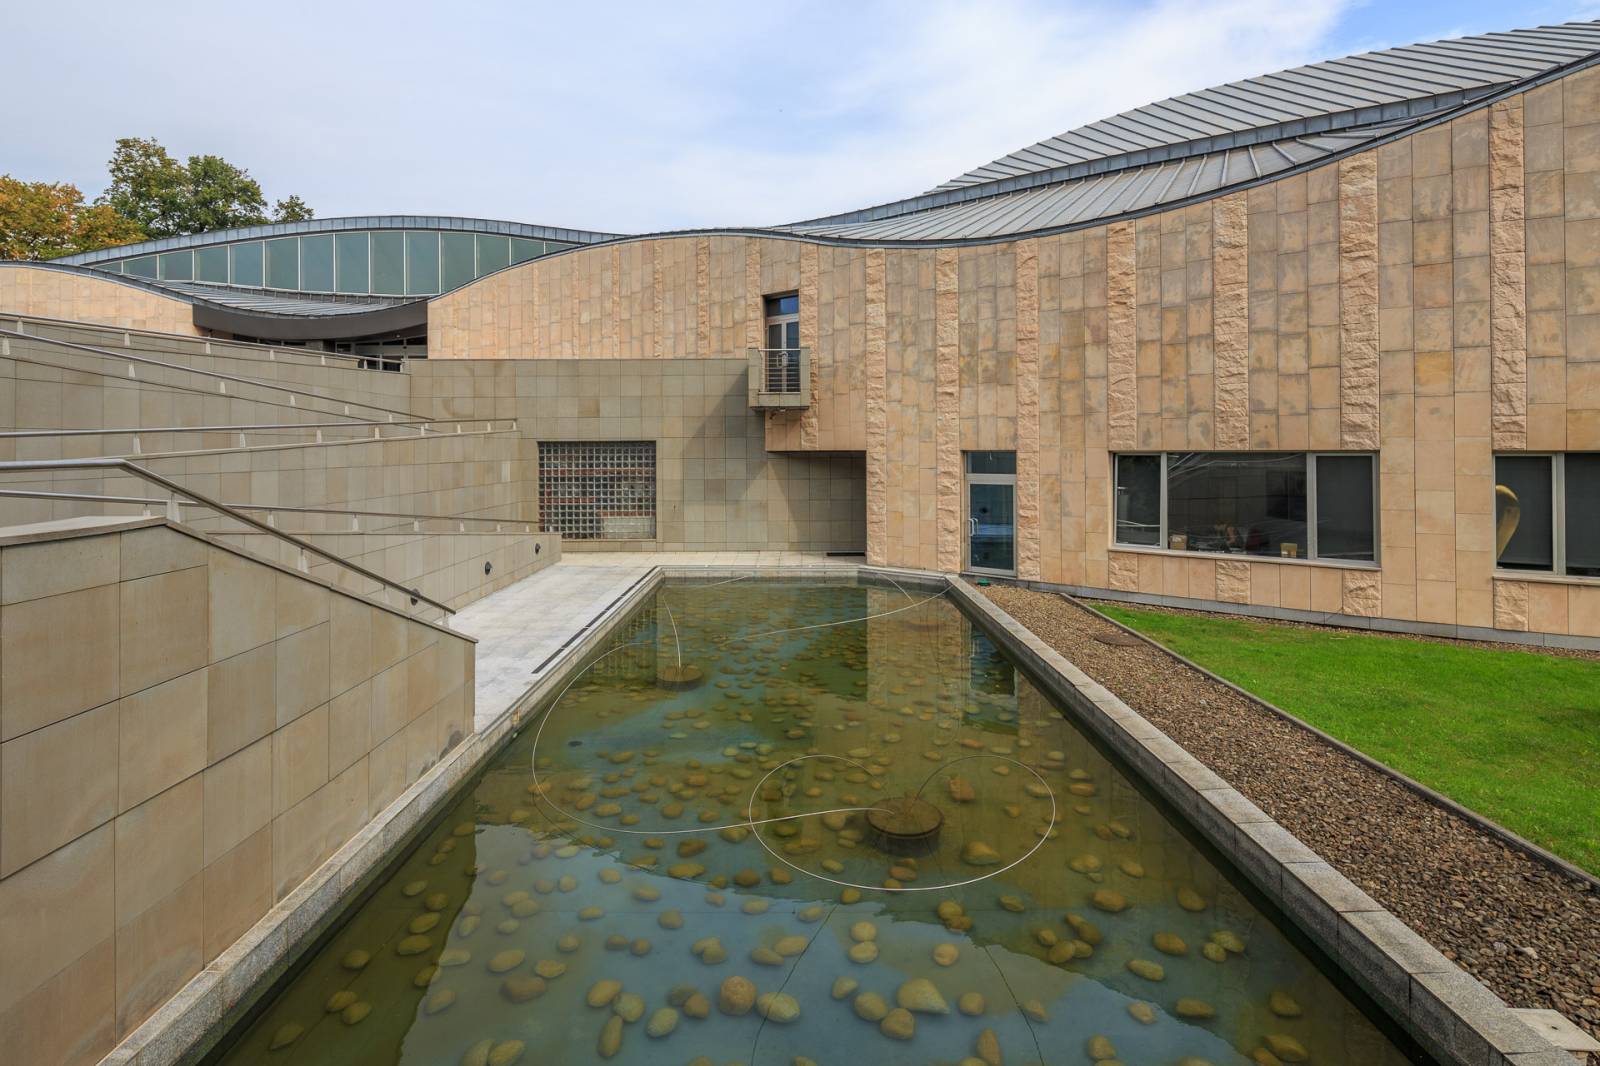 The Manggha Museum of Japanese Art and Technology